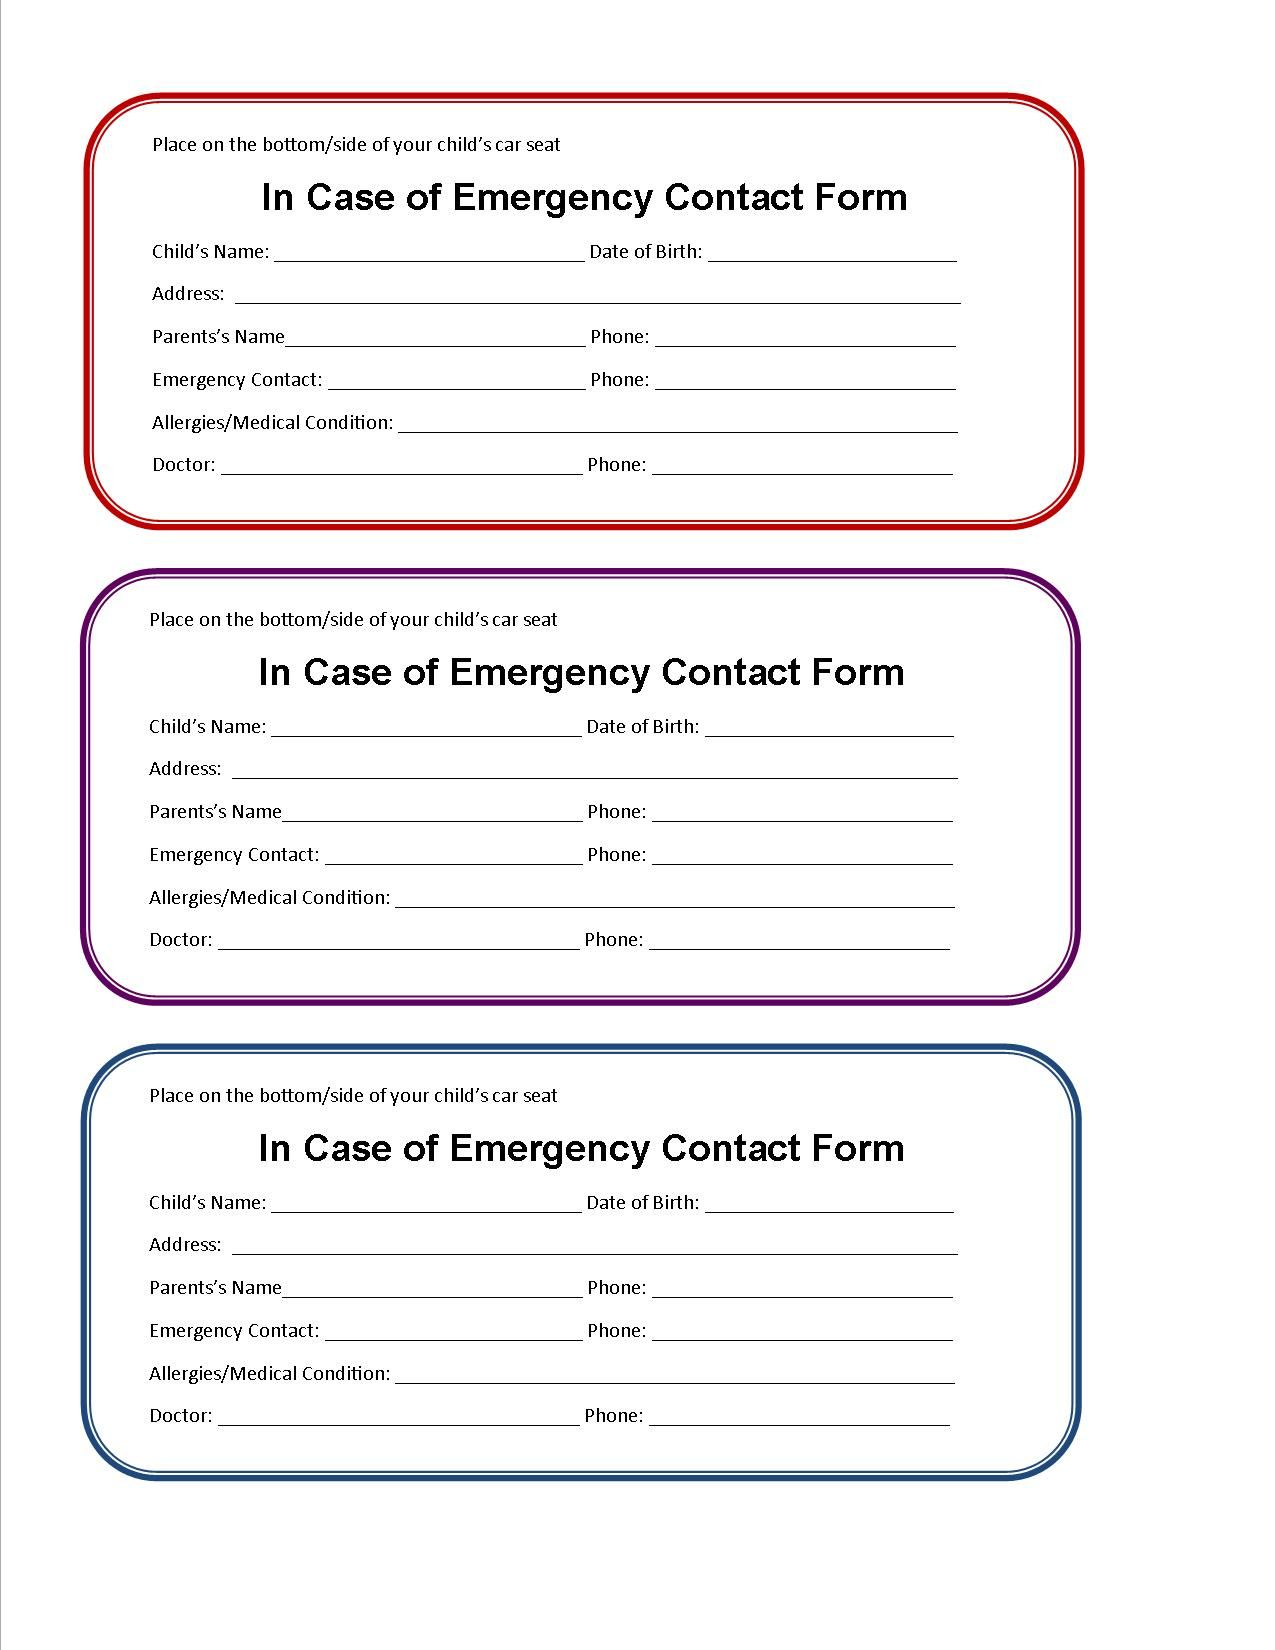 Printable Emergency Contact Form For Car Seat | Emergency Throughout In Case Of Emergency Card Template